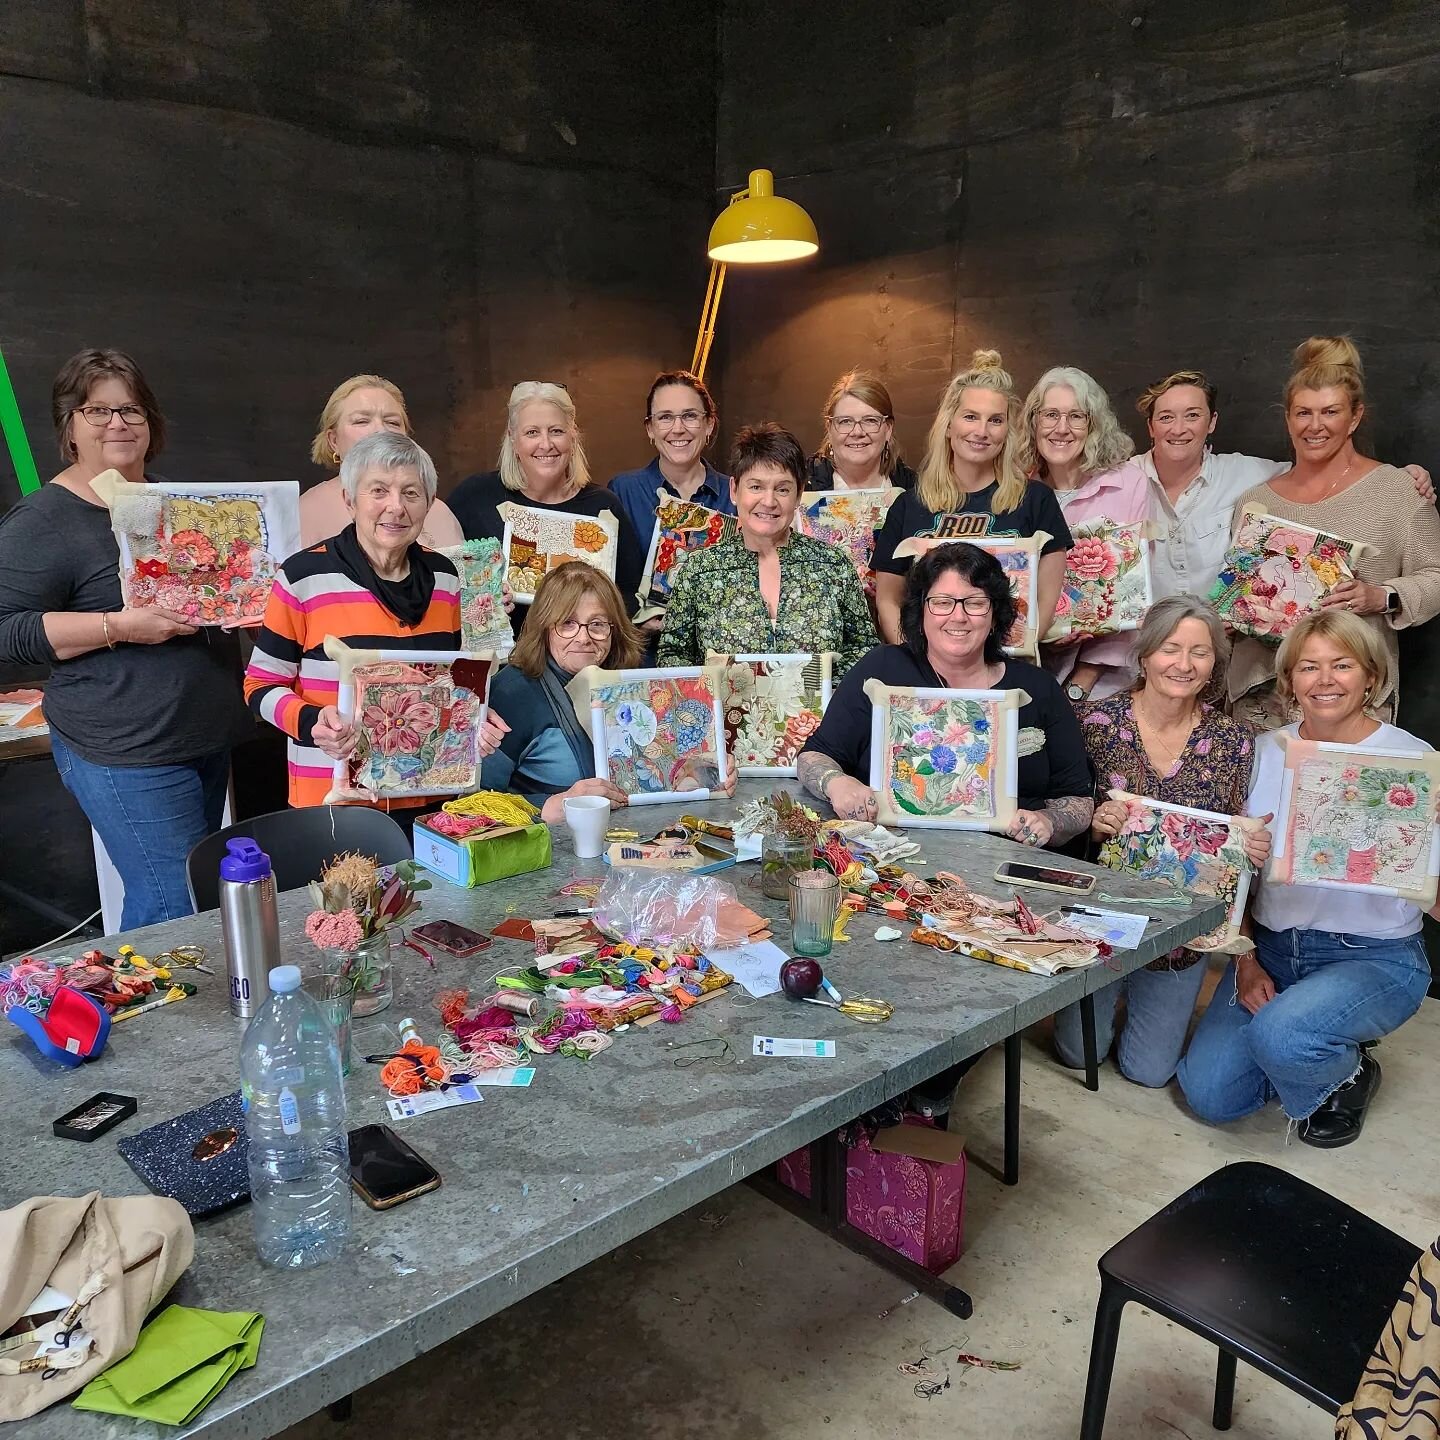 Over flowing with joy and gratitude for the most incredible 7 days in Robertson, Australia @green.door.studios with amazing women. Picutred here are just some of the very special, brave, kind and inspiring women who joined me over the week to create 